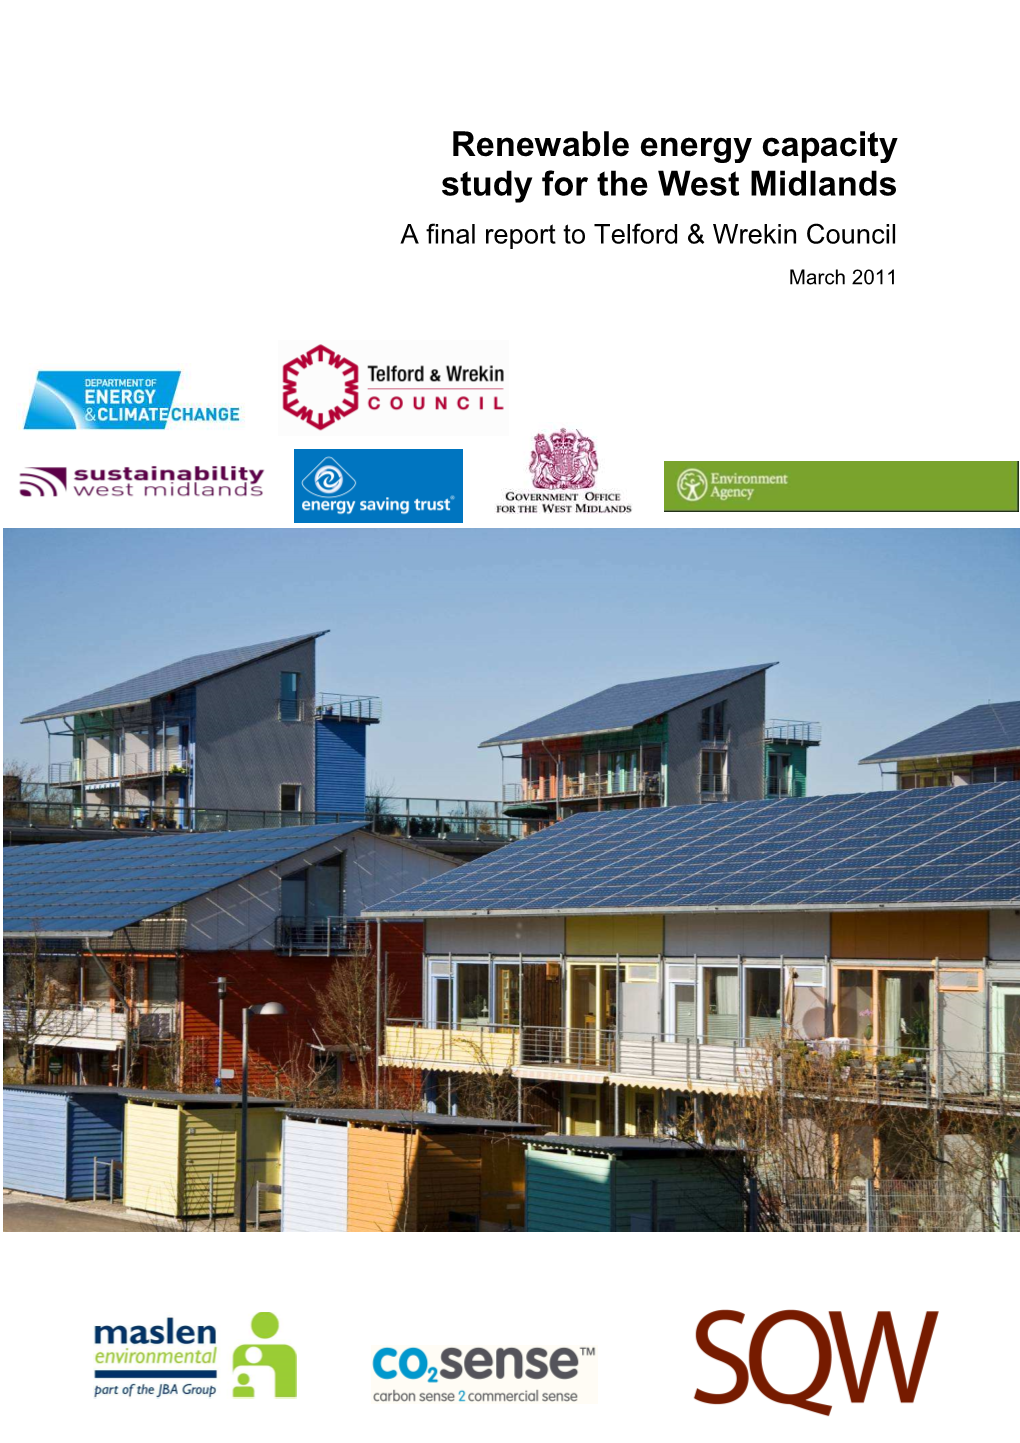 Renewable Energy Capacity Study for the West Midlands a Final Report to Telford & Wrekin Council March 2011